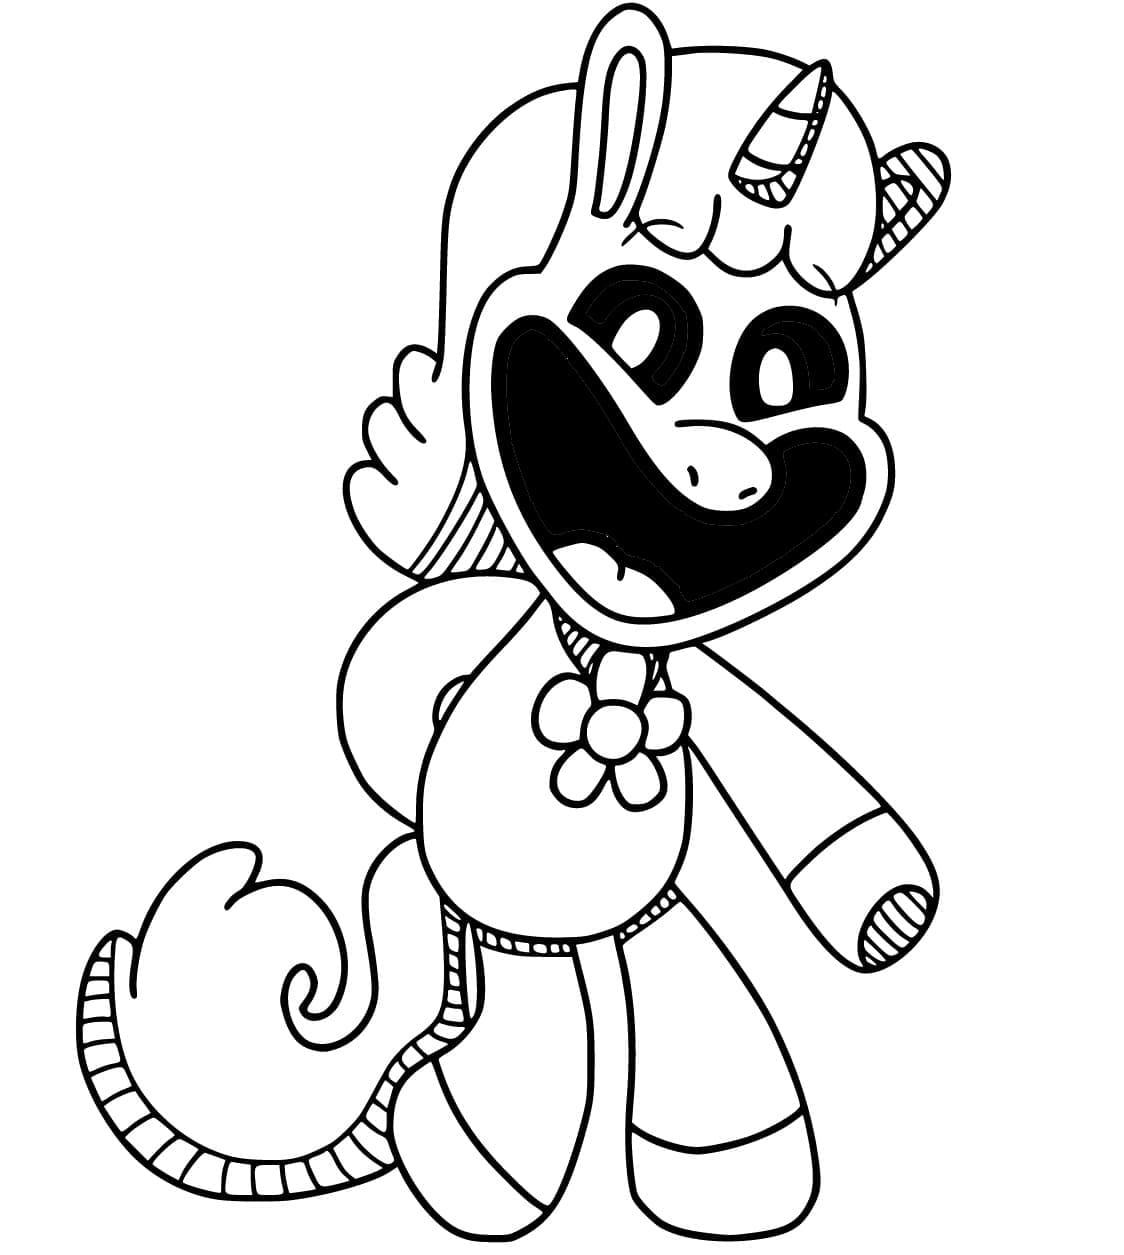 CraftyCorn Smiling Critters coloring page